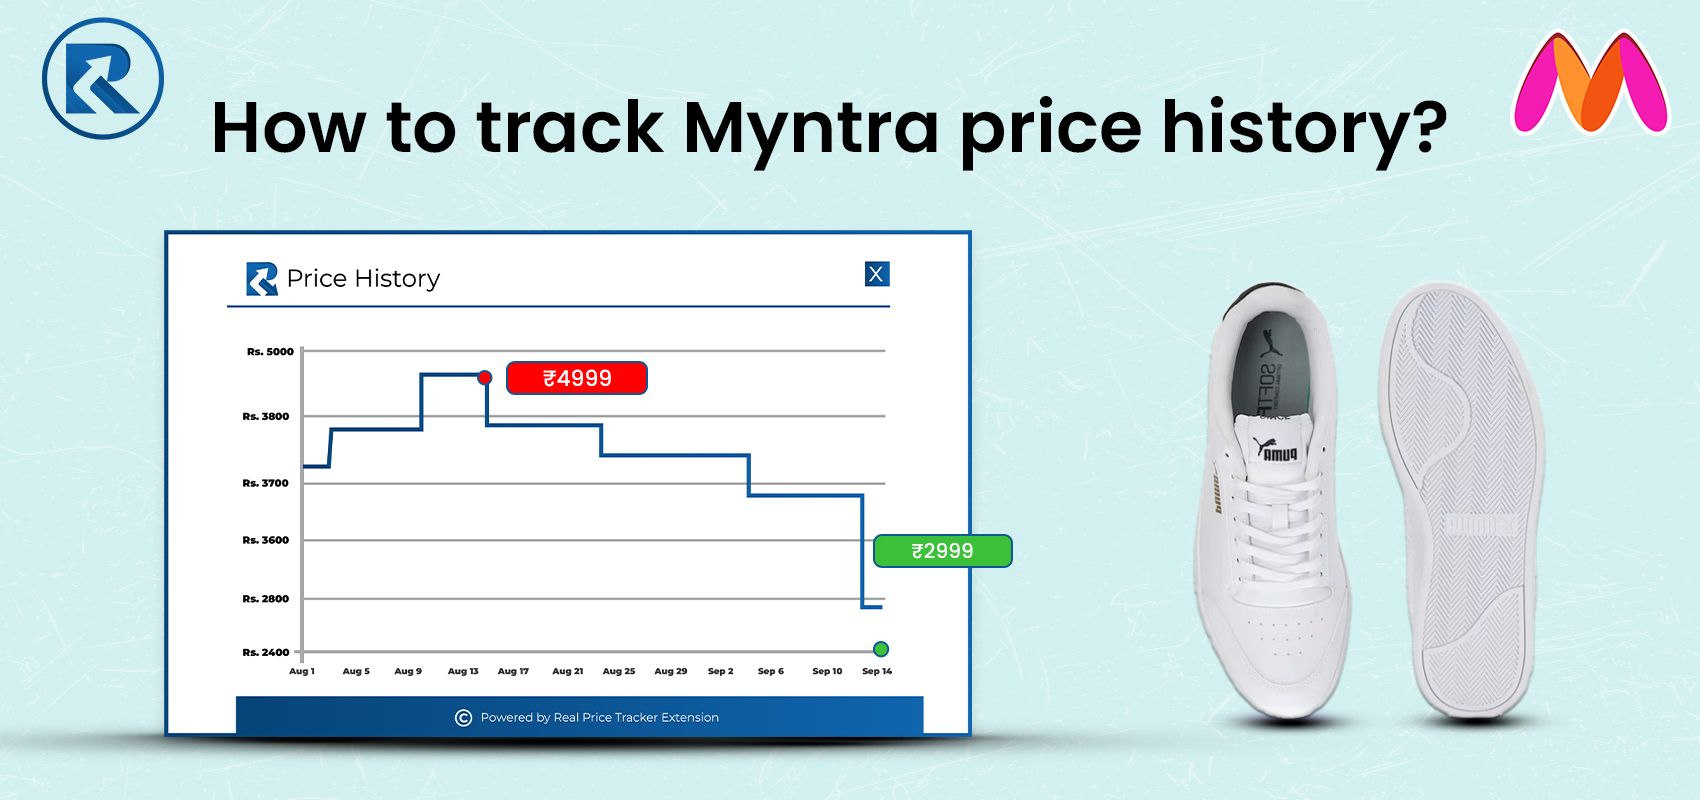 How to track Myntra price history?